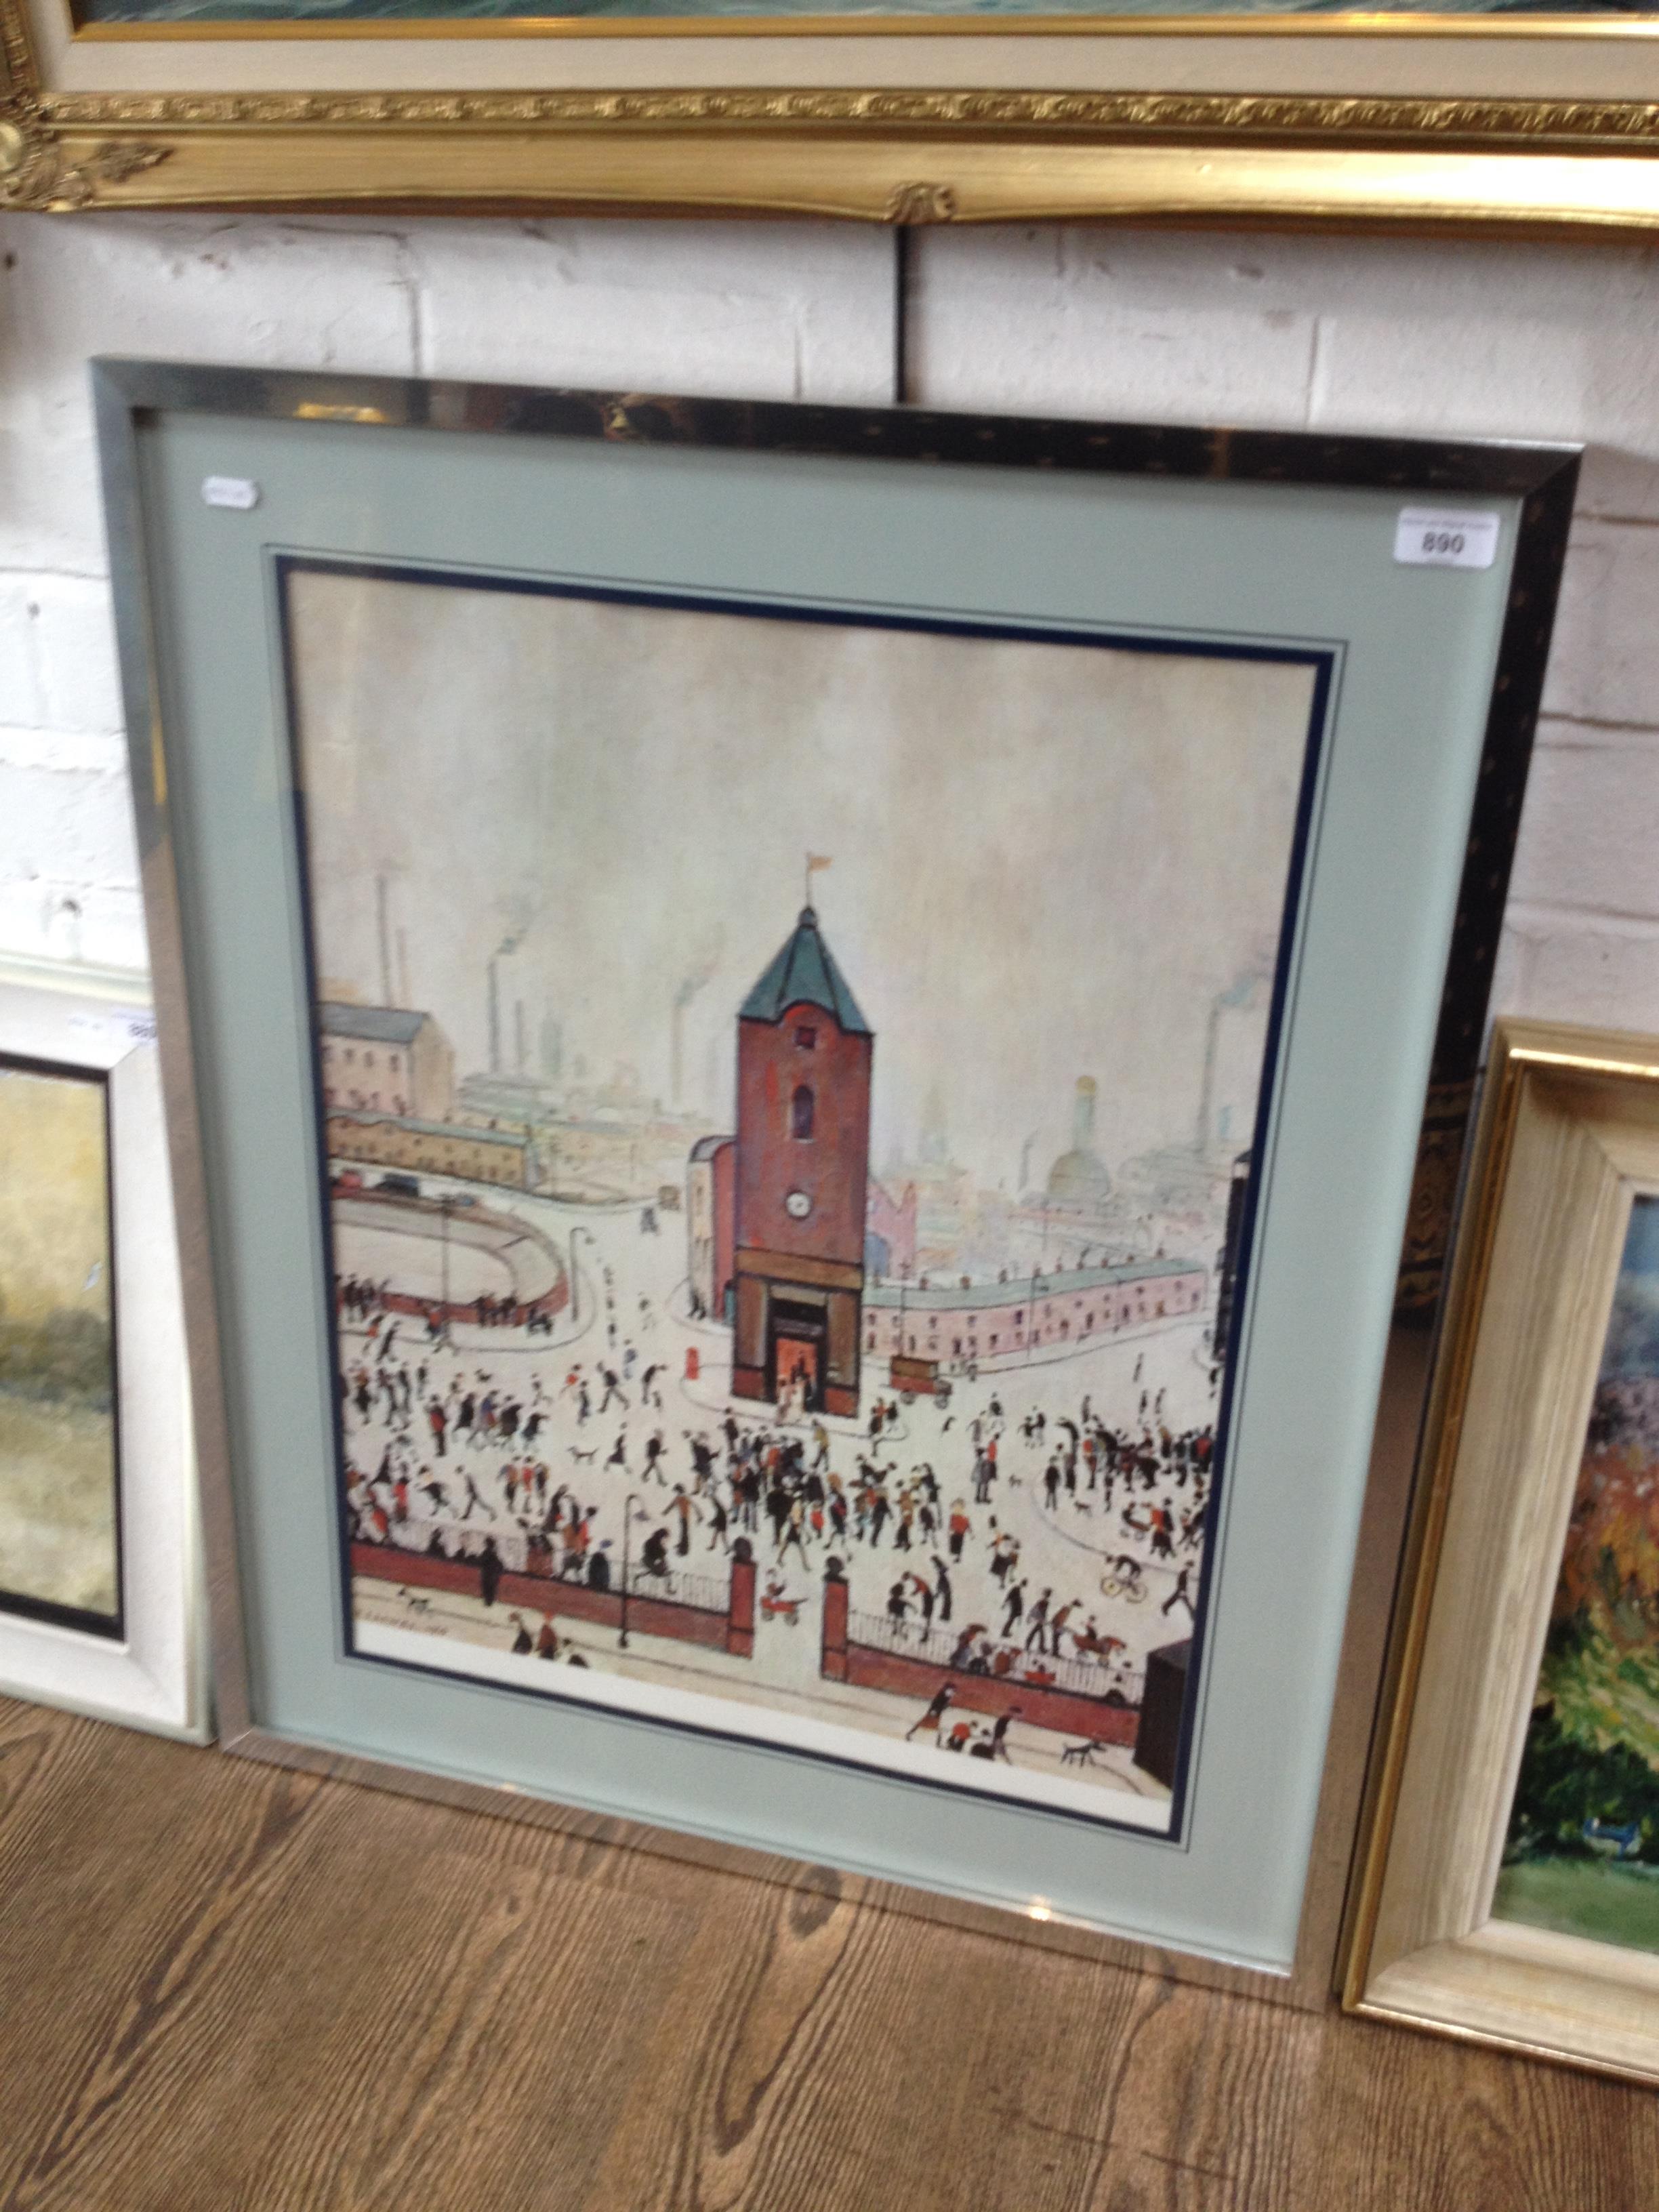 After L.S. Lowry, 'Town Centre', colour print, 48cm x 60cm, unsigned, glazed and framed 67cm x 81cm.